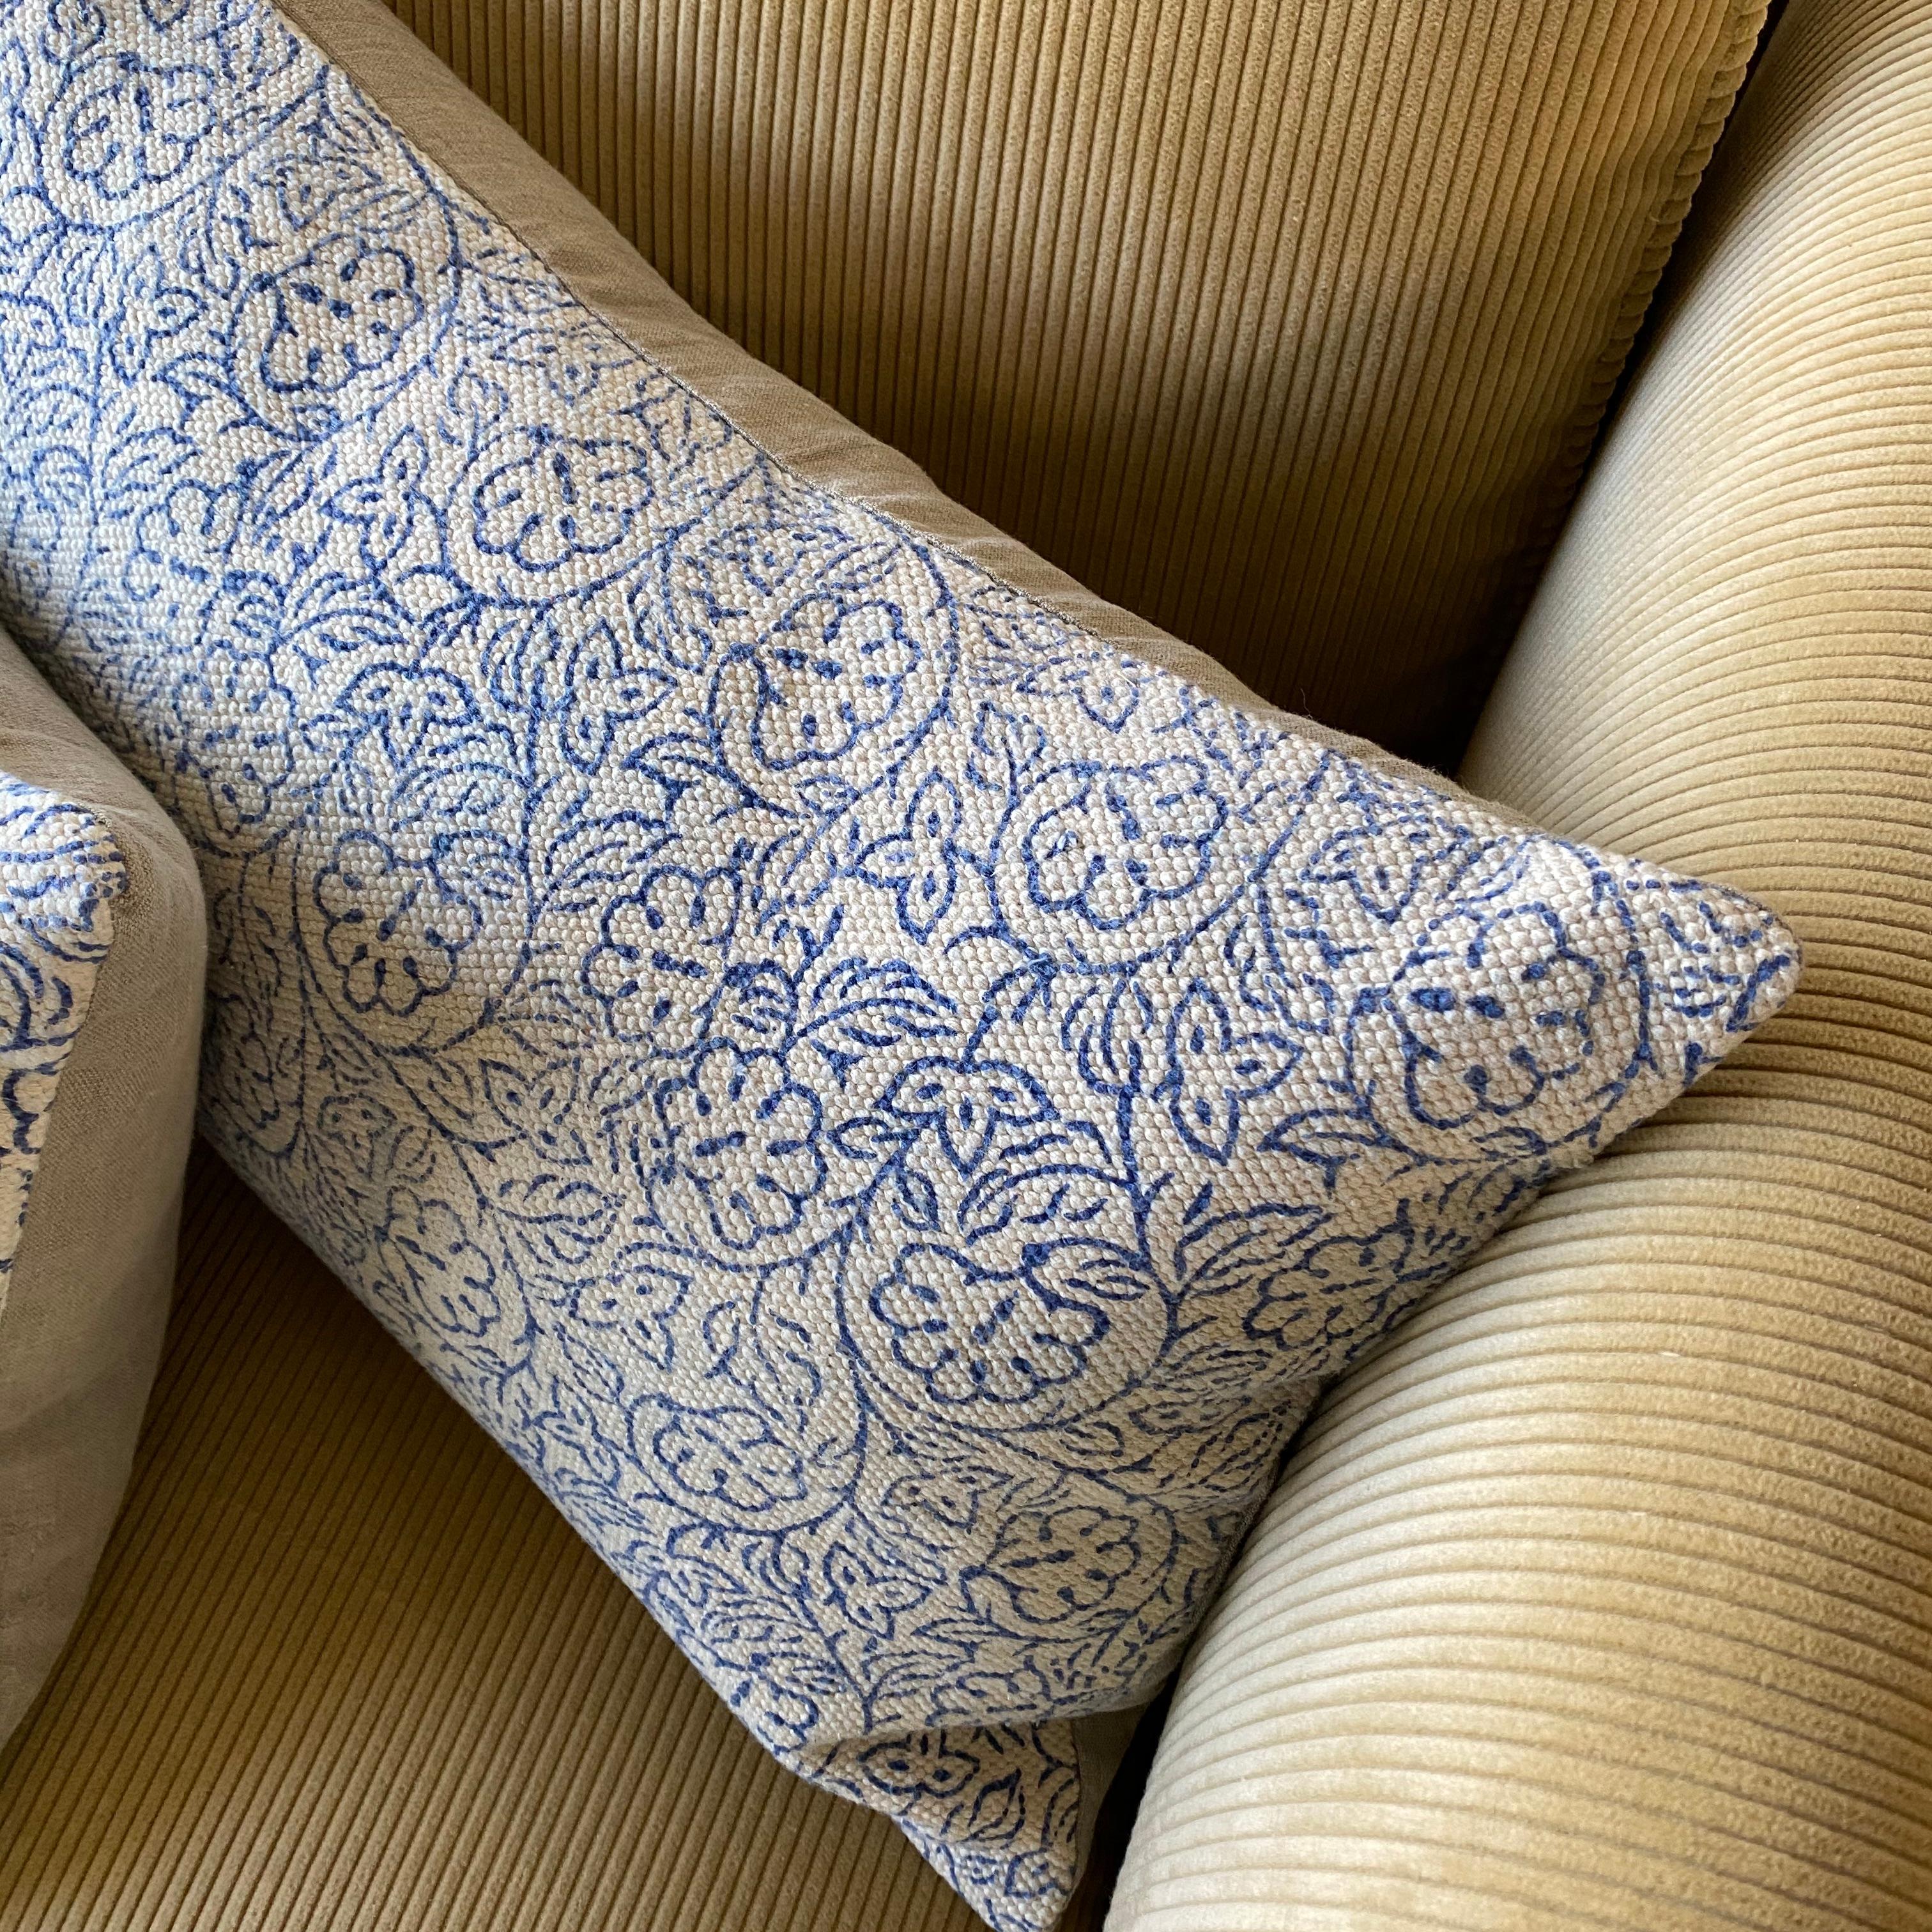 Heavy cream and blue floral linen pillow made from a vintage textile. Feather and down insert.